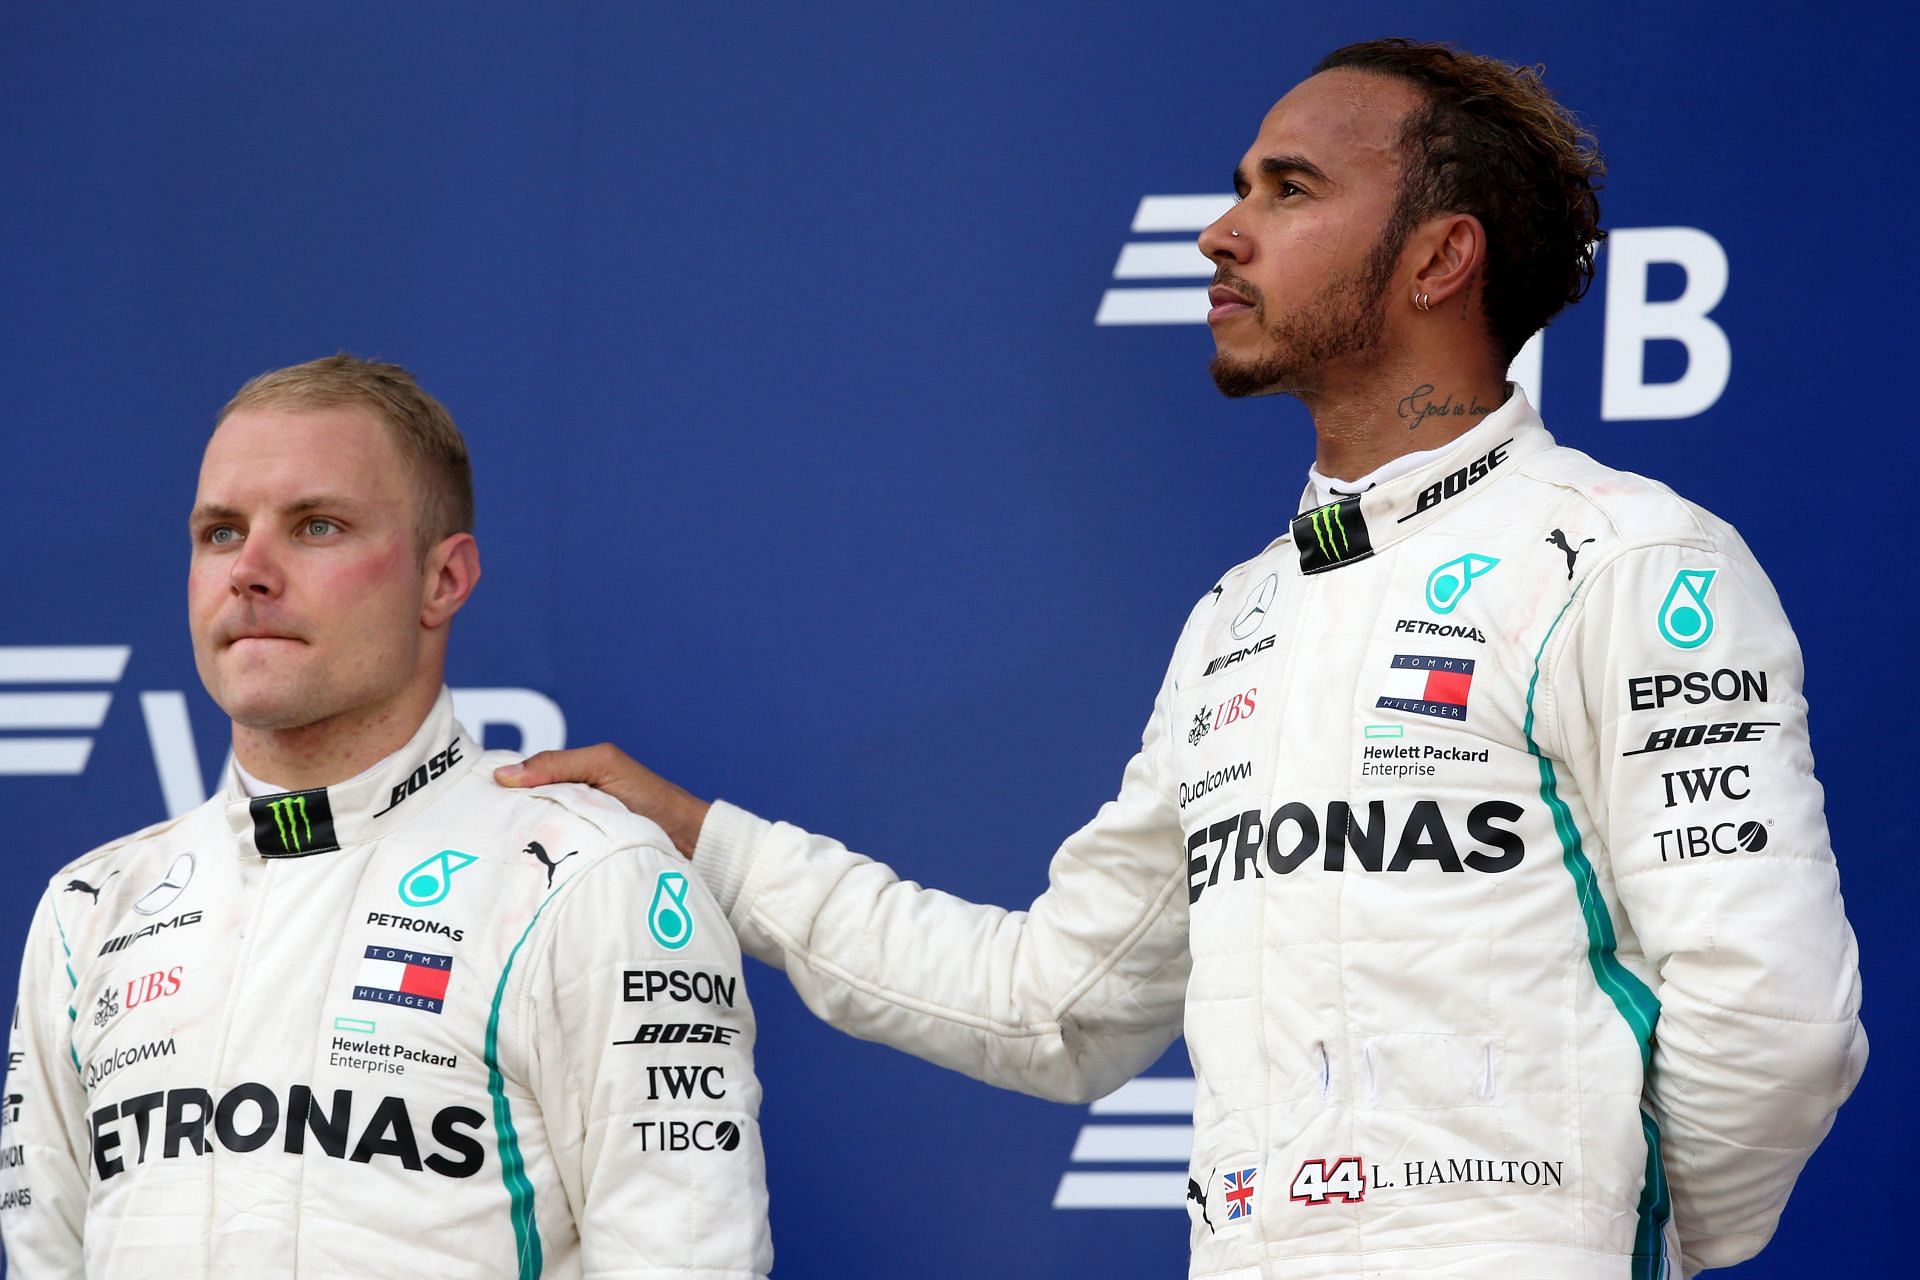 Obeying team orders, Valtteri Bottas (left) allowed teammate Lewis Hamilton (right) to win the 2018 Russian Grand Prix